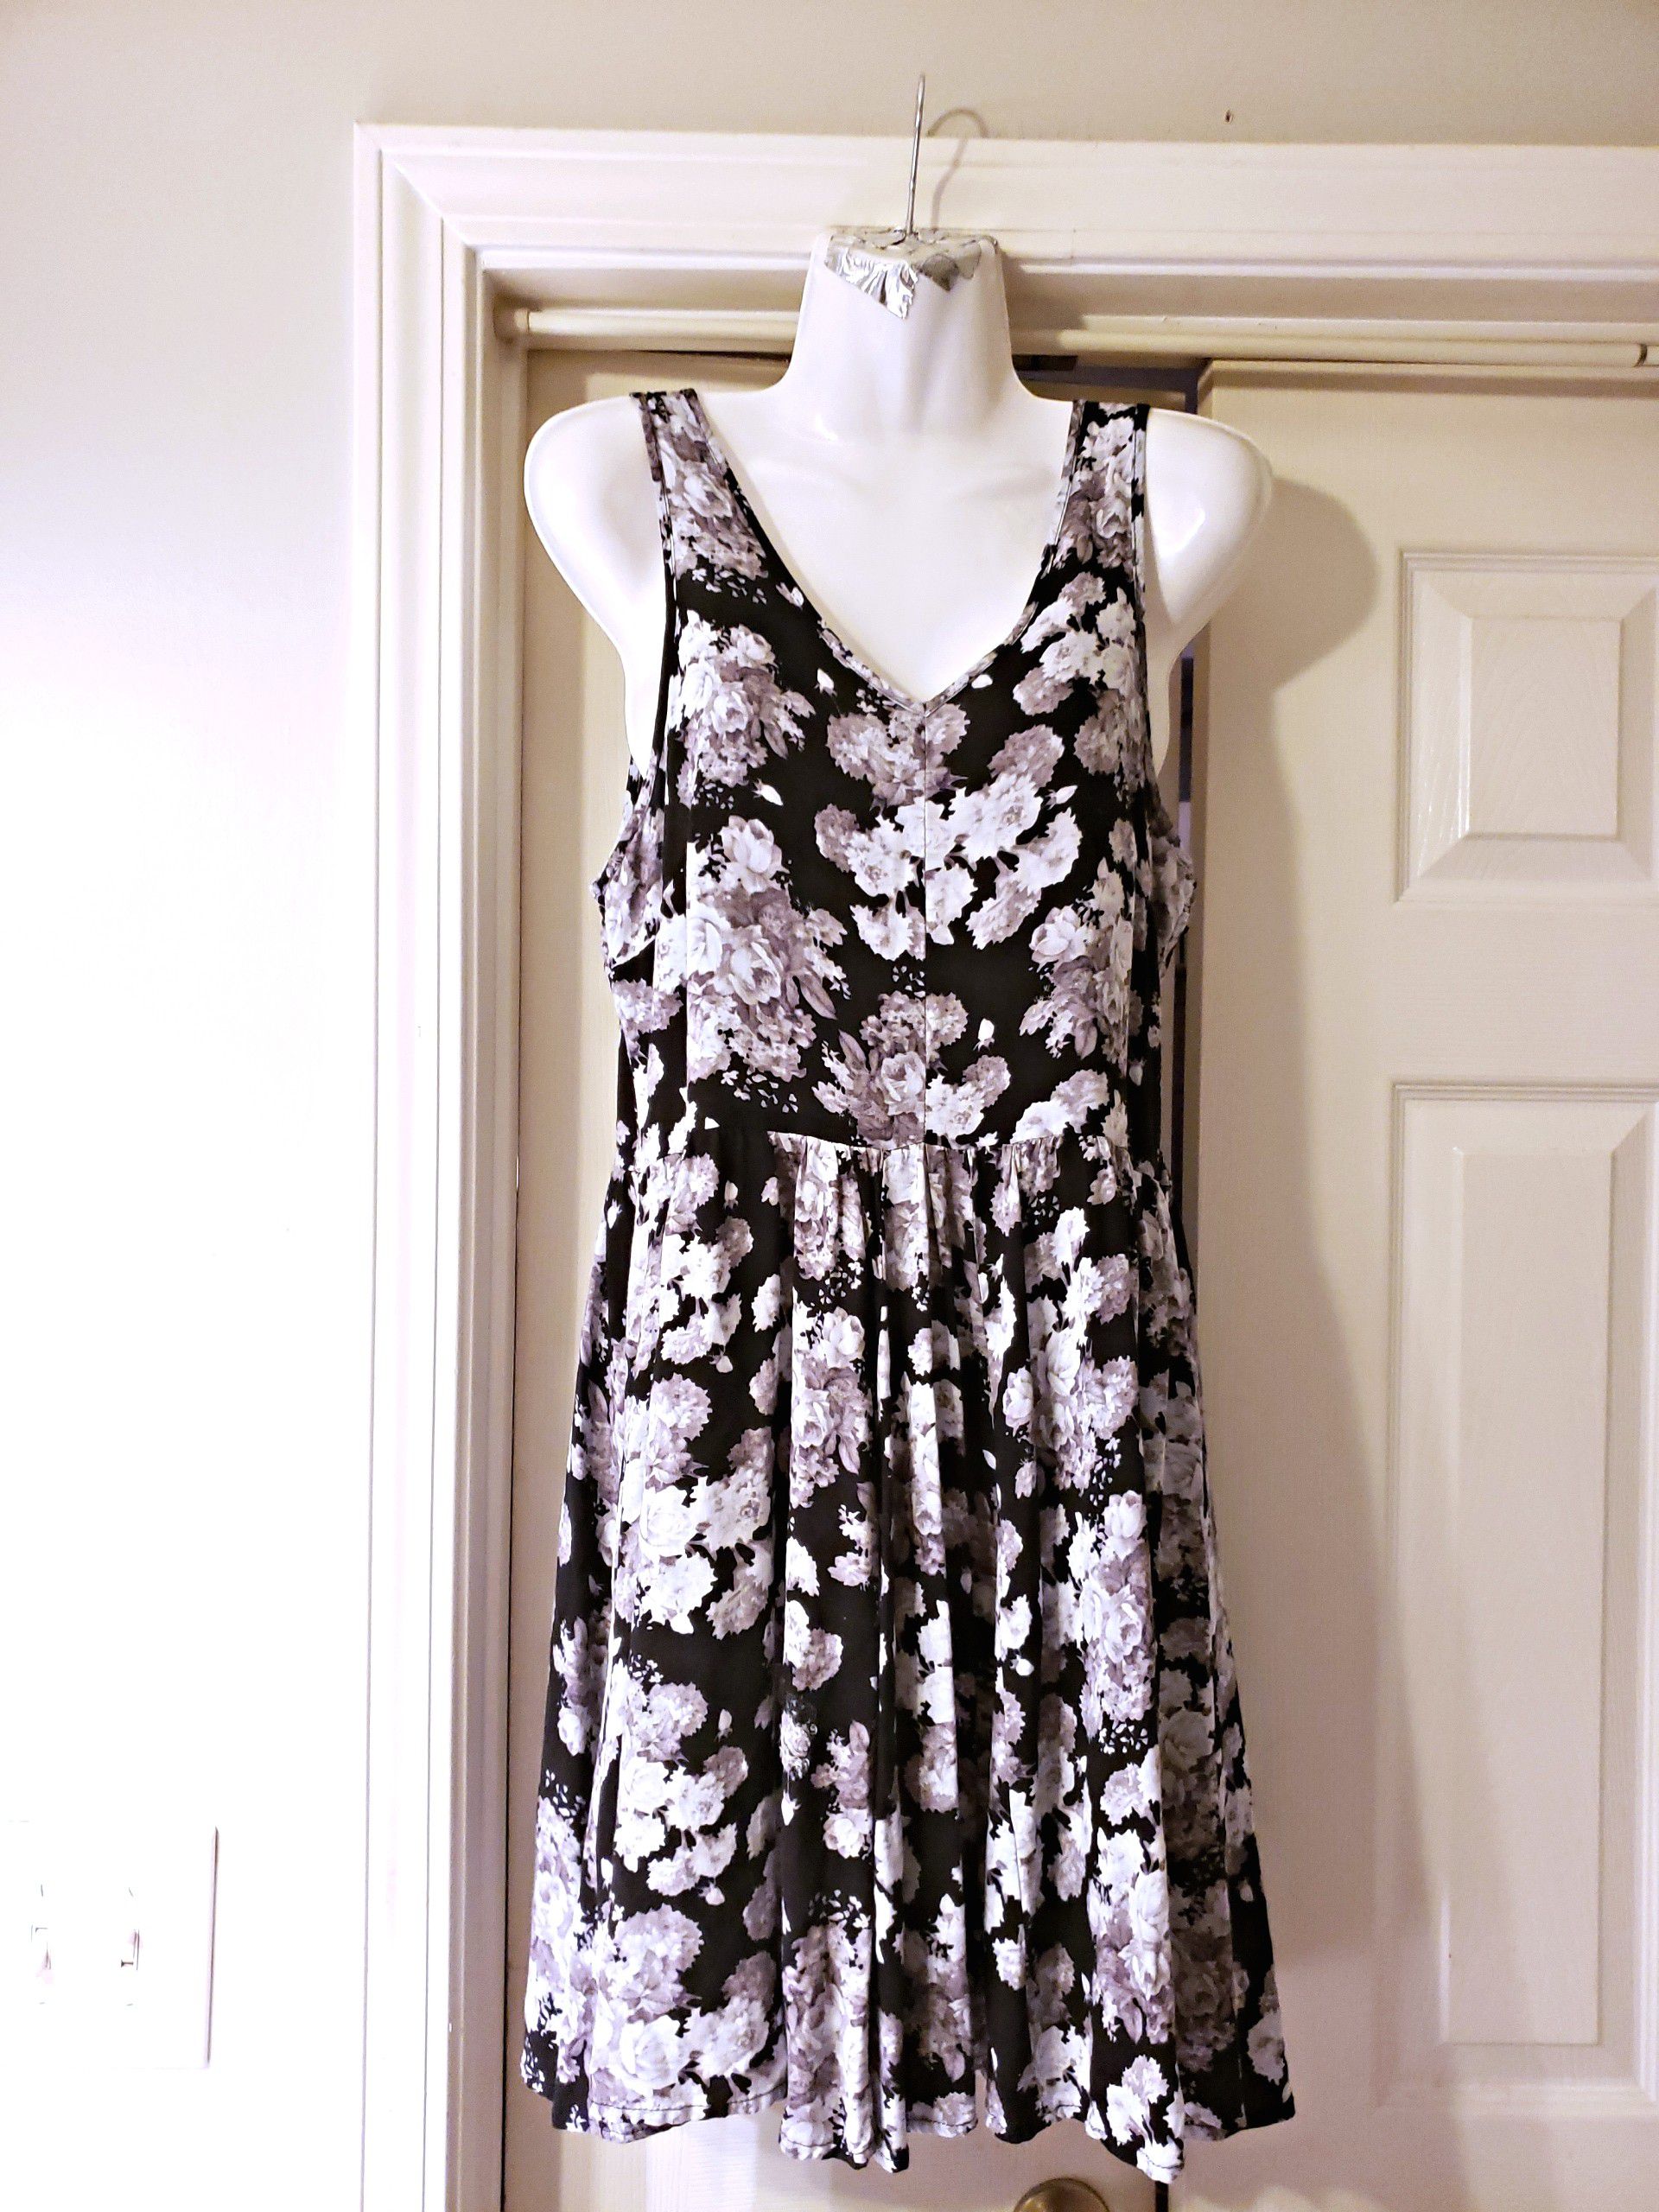 NWOT HOT TOPIC DRESS BLACK AND WHITE WITH FLOWERS SIZE M